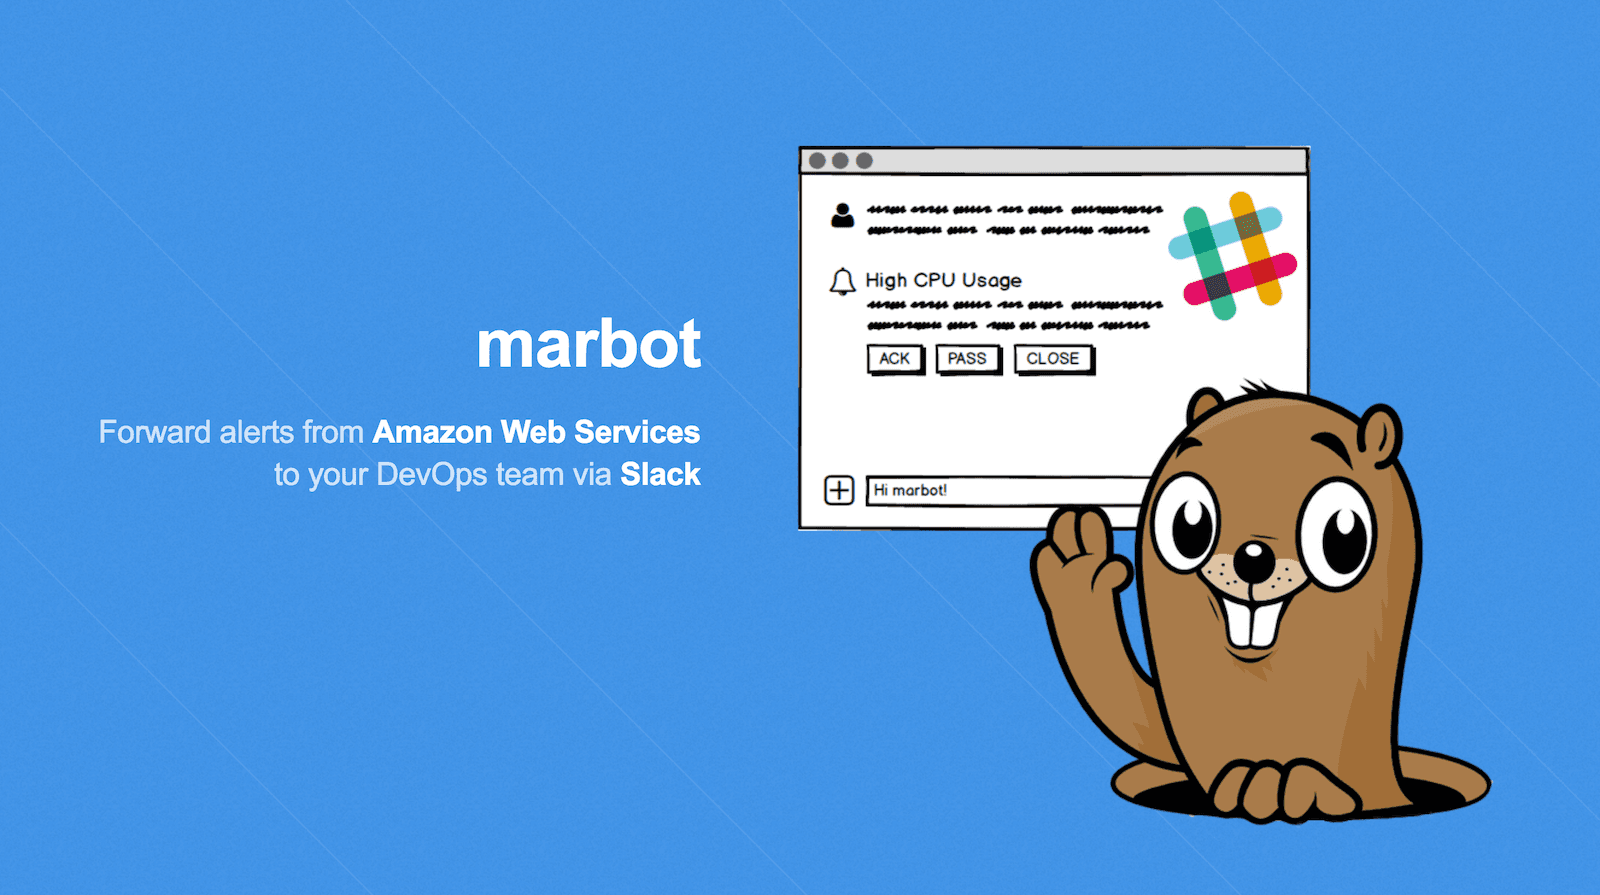 marbot, our submission to the AWS Serverless Chatbot Competition